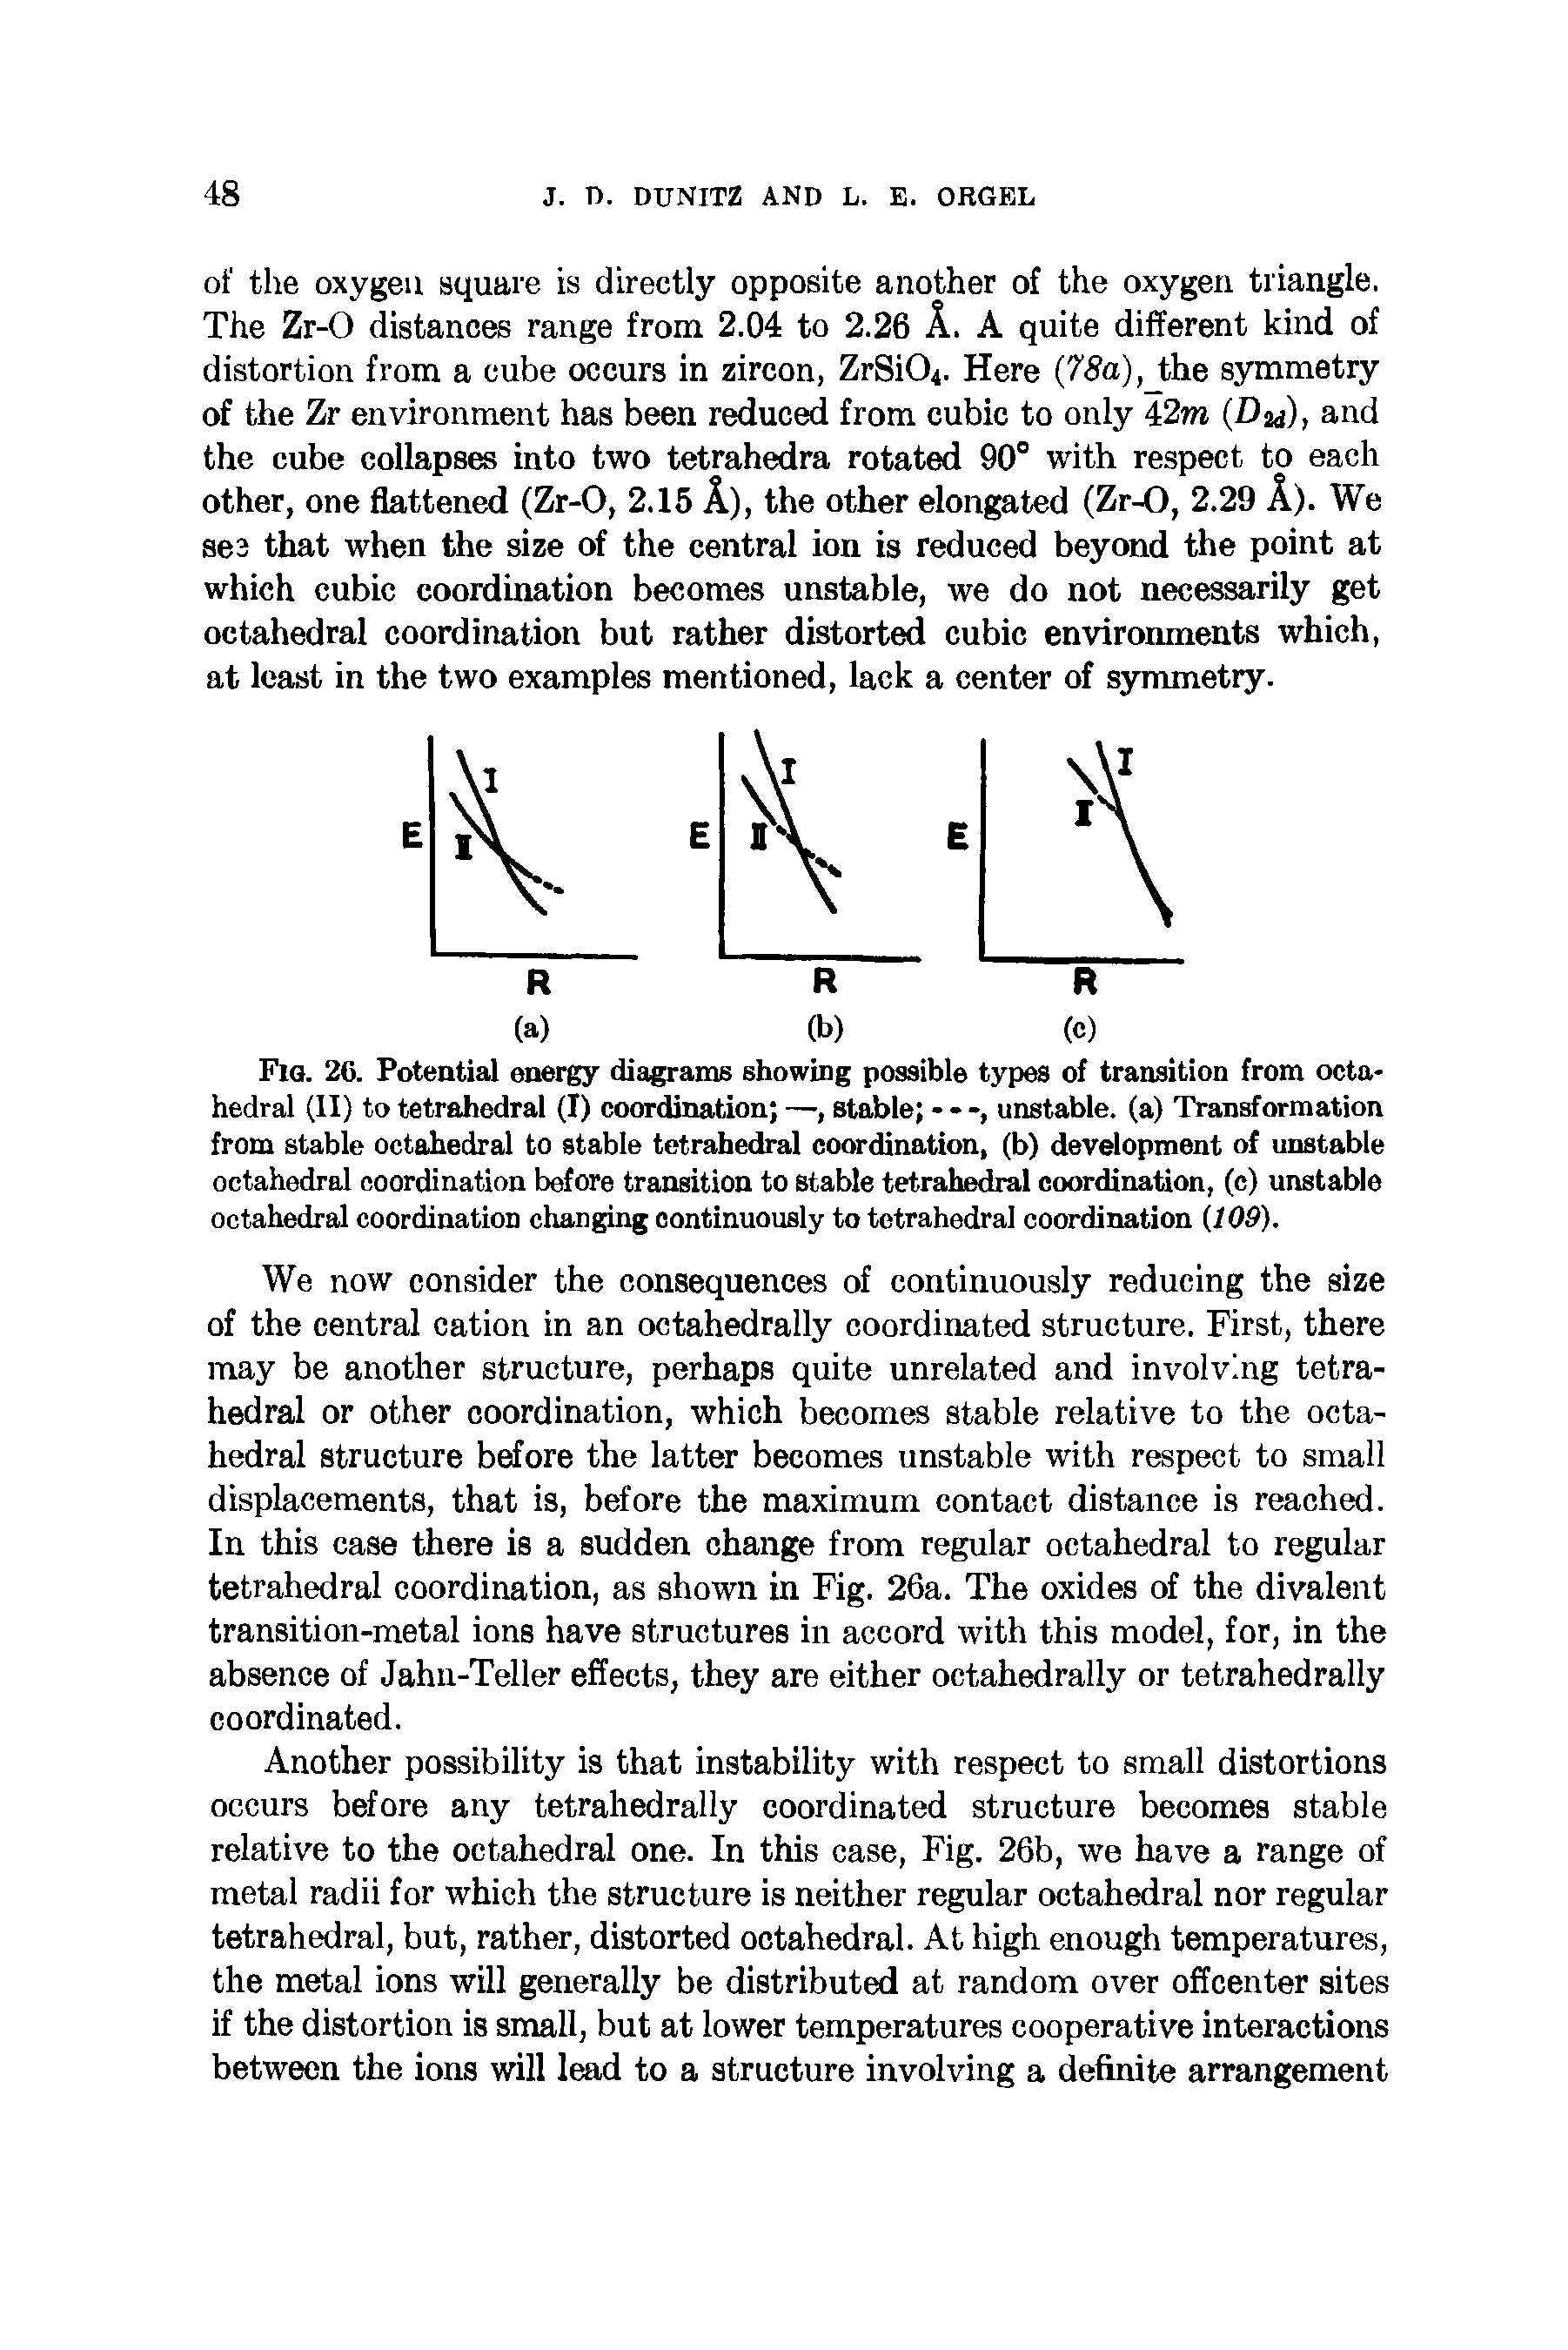 Fig. 26. Potential energy diagrams showing possible types of transition from octahedral (II) to tetrahedral (I) coordination —, stable - - -, unstable, (a) Transformation from stable octahedral to stable tetrahedral coordination, (b) development of unstable octahedral coordination before transition to stable tetrahedral coordination, (c) unstable octahedral coordination changing continuously to tetrahedral coordination (109).